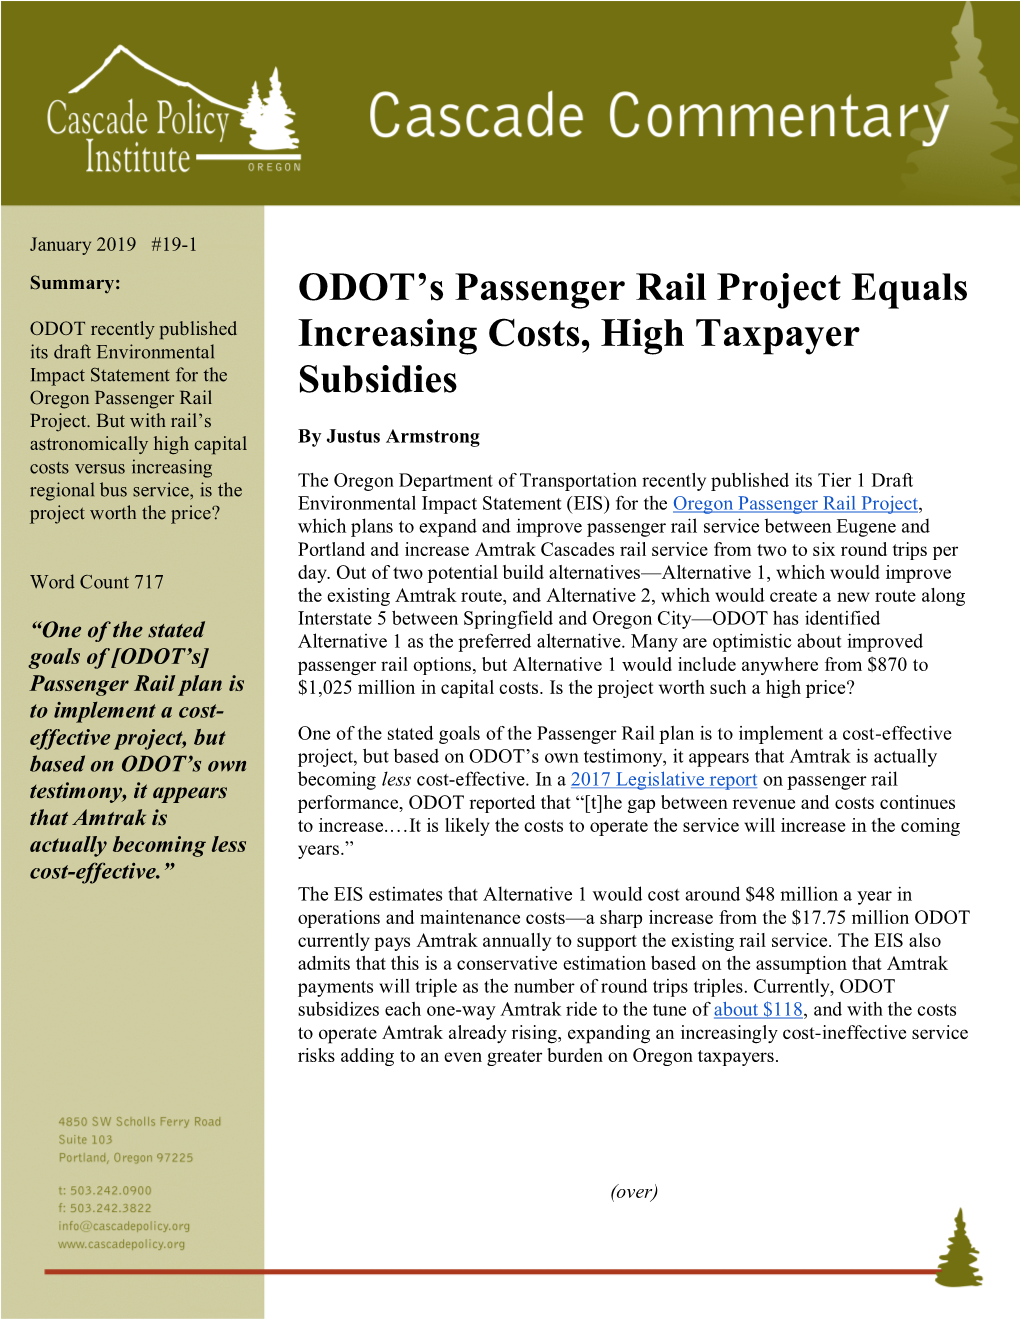 ODOT's Passenger Rail Project Equals Increasing Costs, High